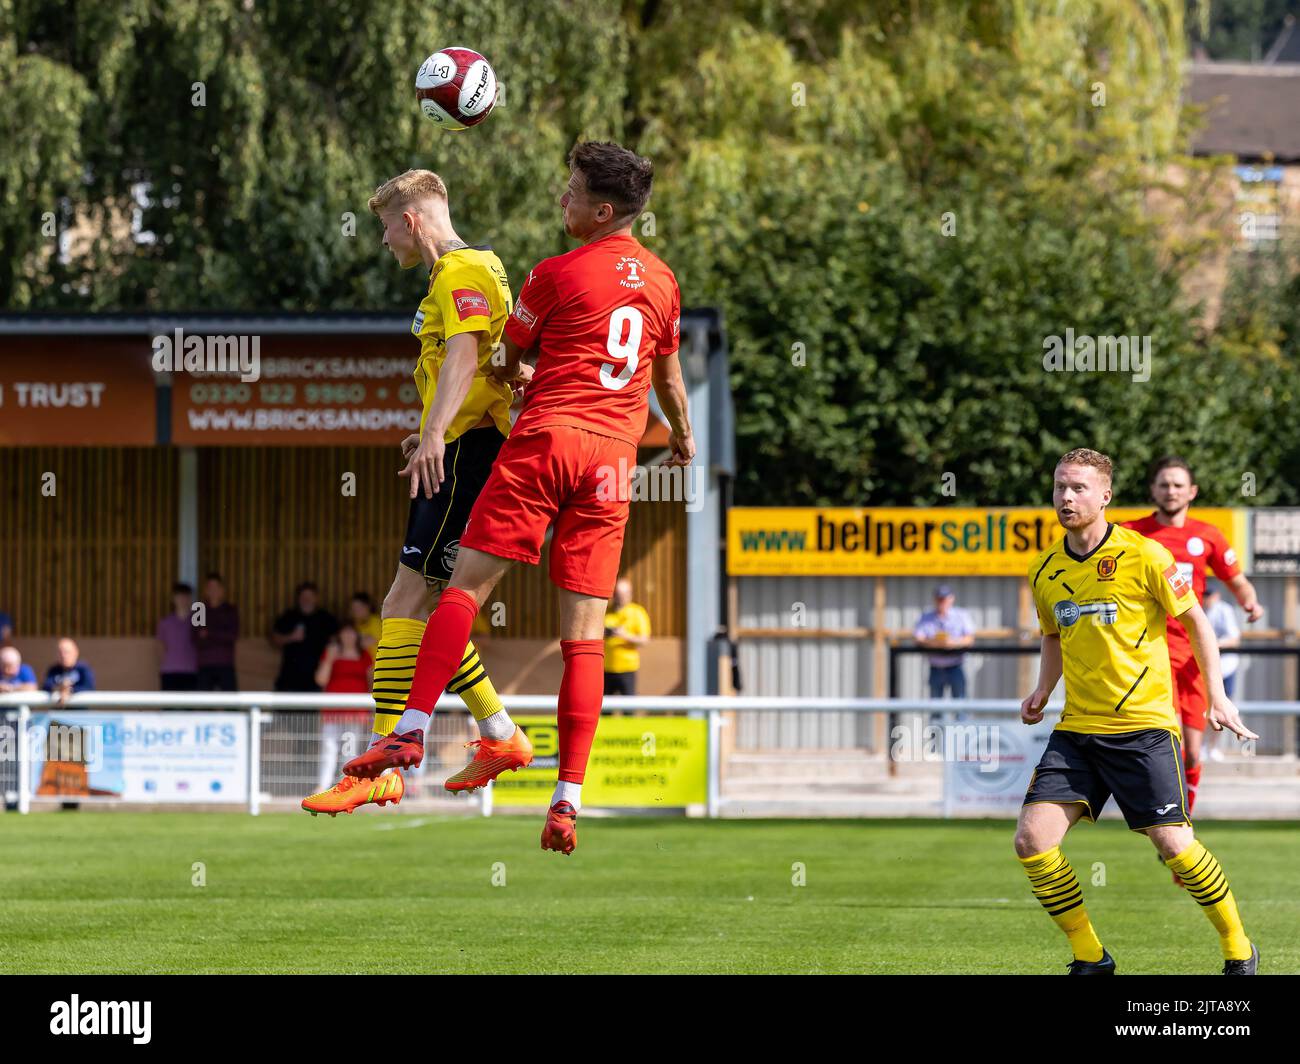 Two players compete for a high ball in a match at Belper Town FC v Warrington Rylands FC Stock Photo